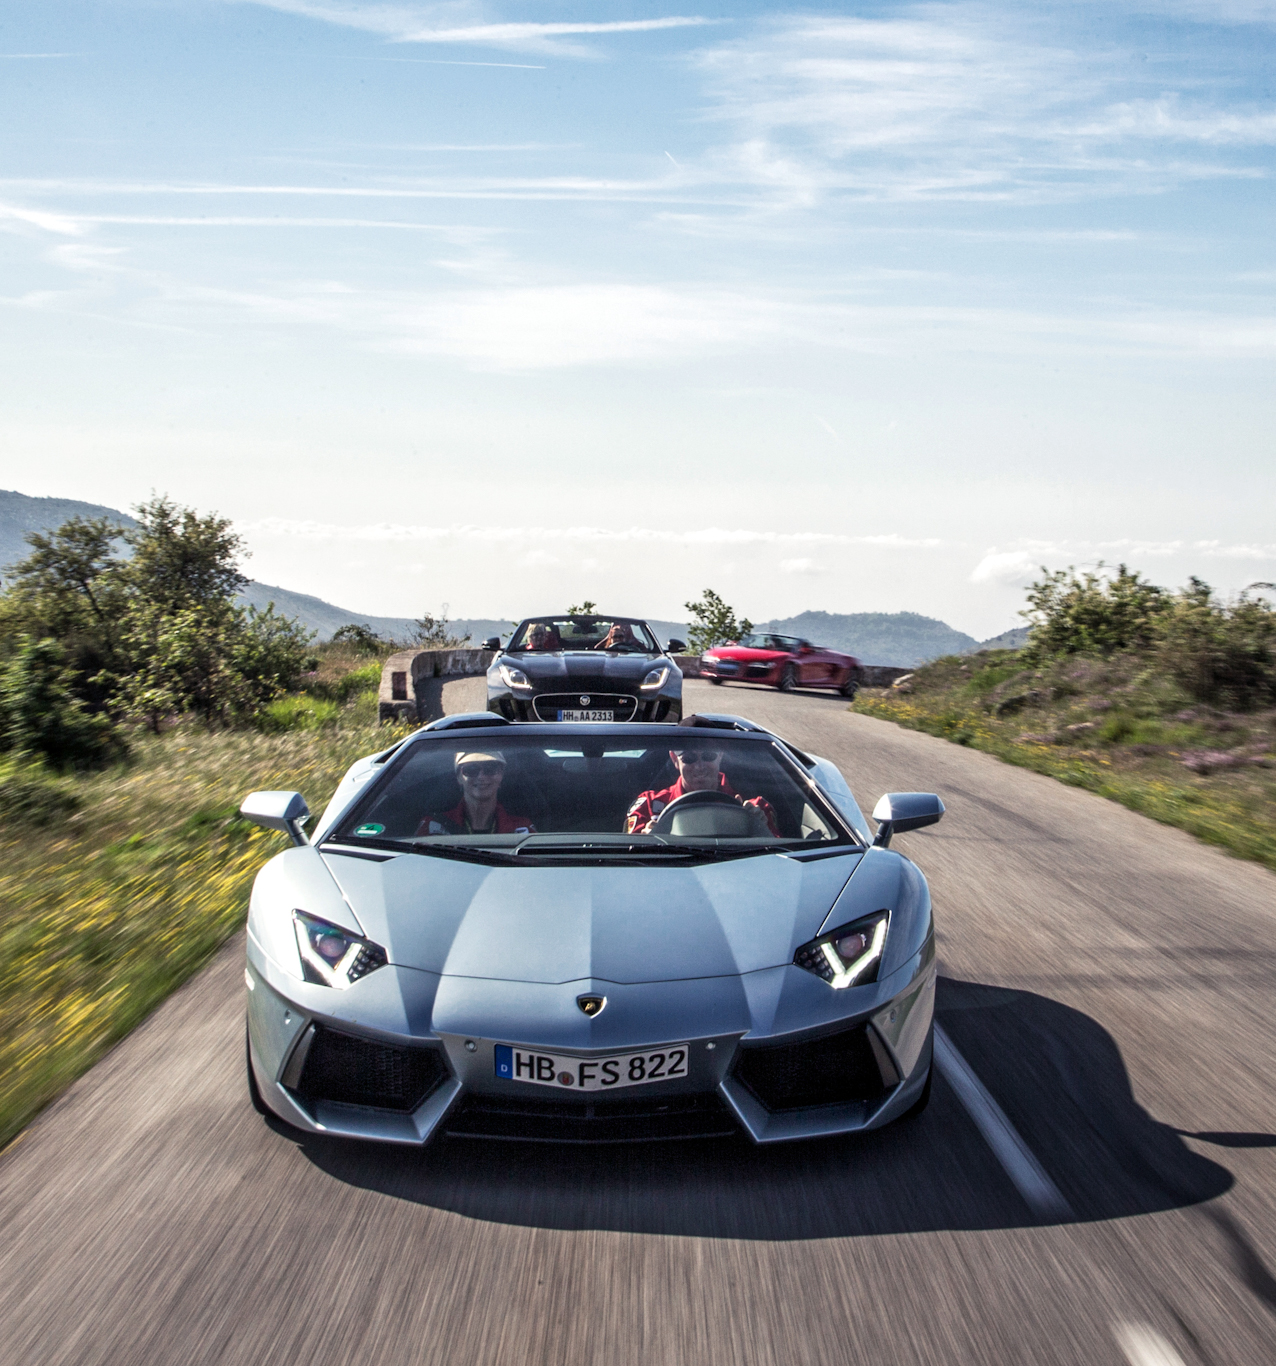 South of France Supercar Experience - 1 Day